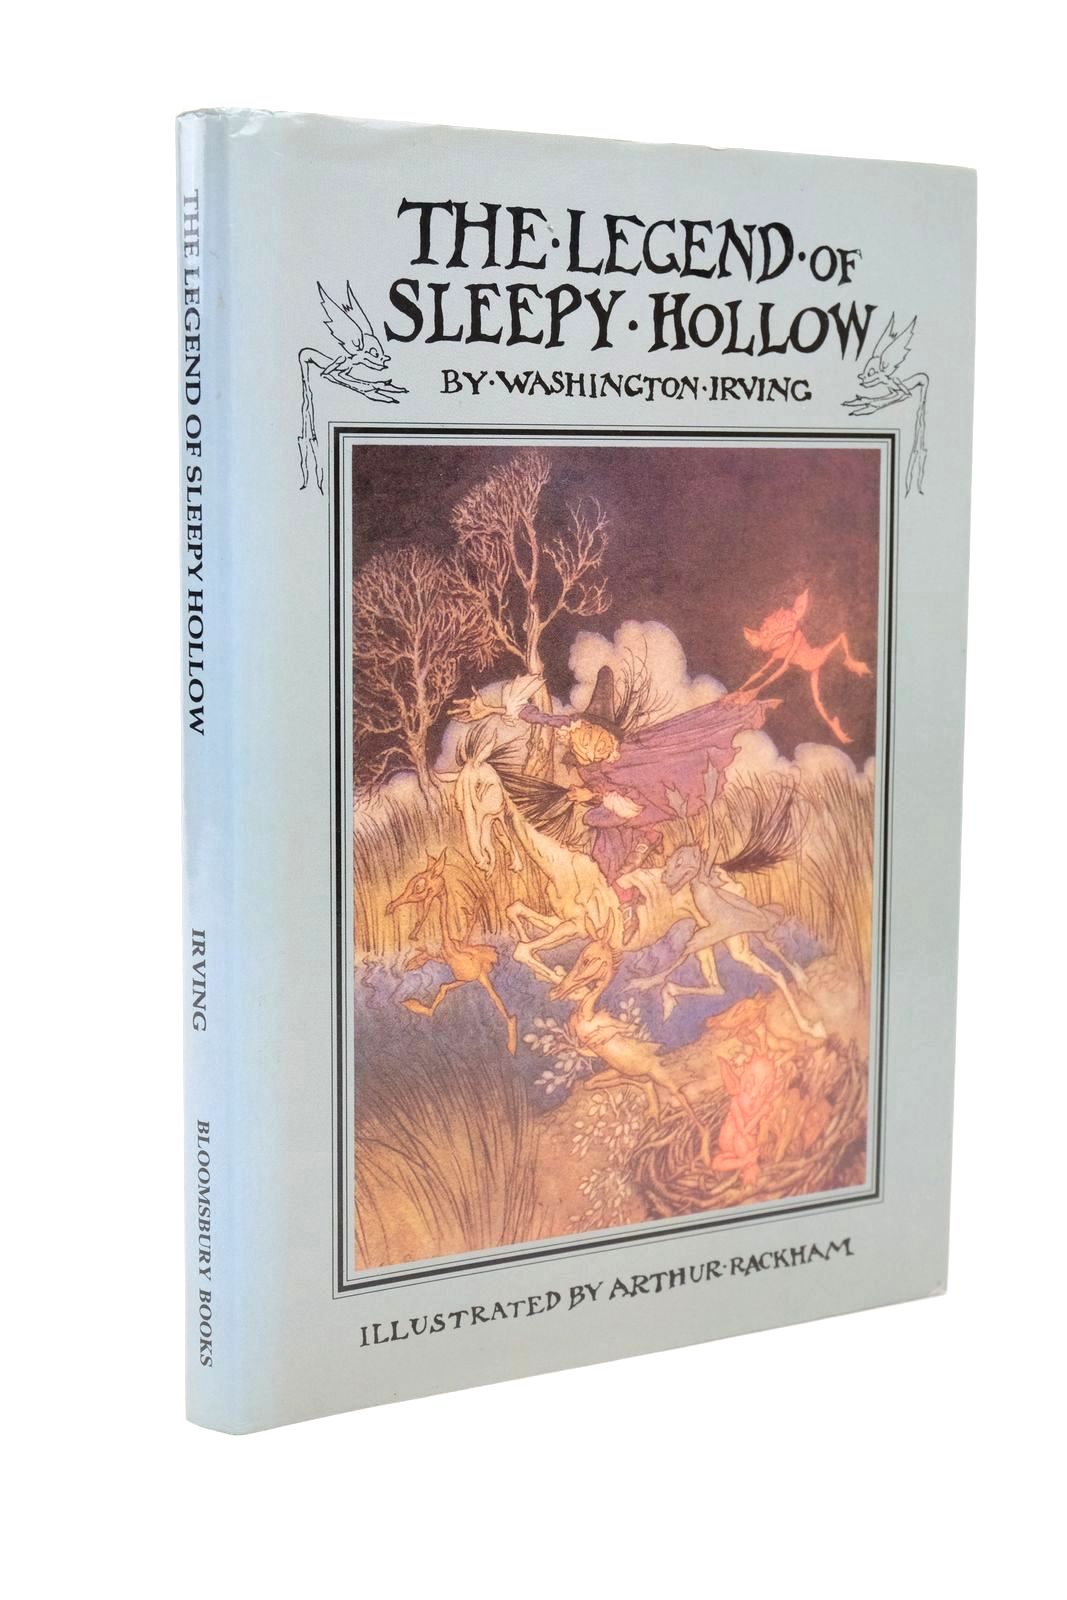 Photo of THE LEGEND OF SLEEPY HOLLOW written by Irving, Washington illustrated by Rackham, Arthur published by Bloomsbury Books (STOCK CODE: 1323126)  for sale by Stella & Rose's Books